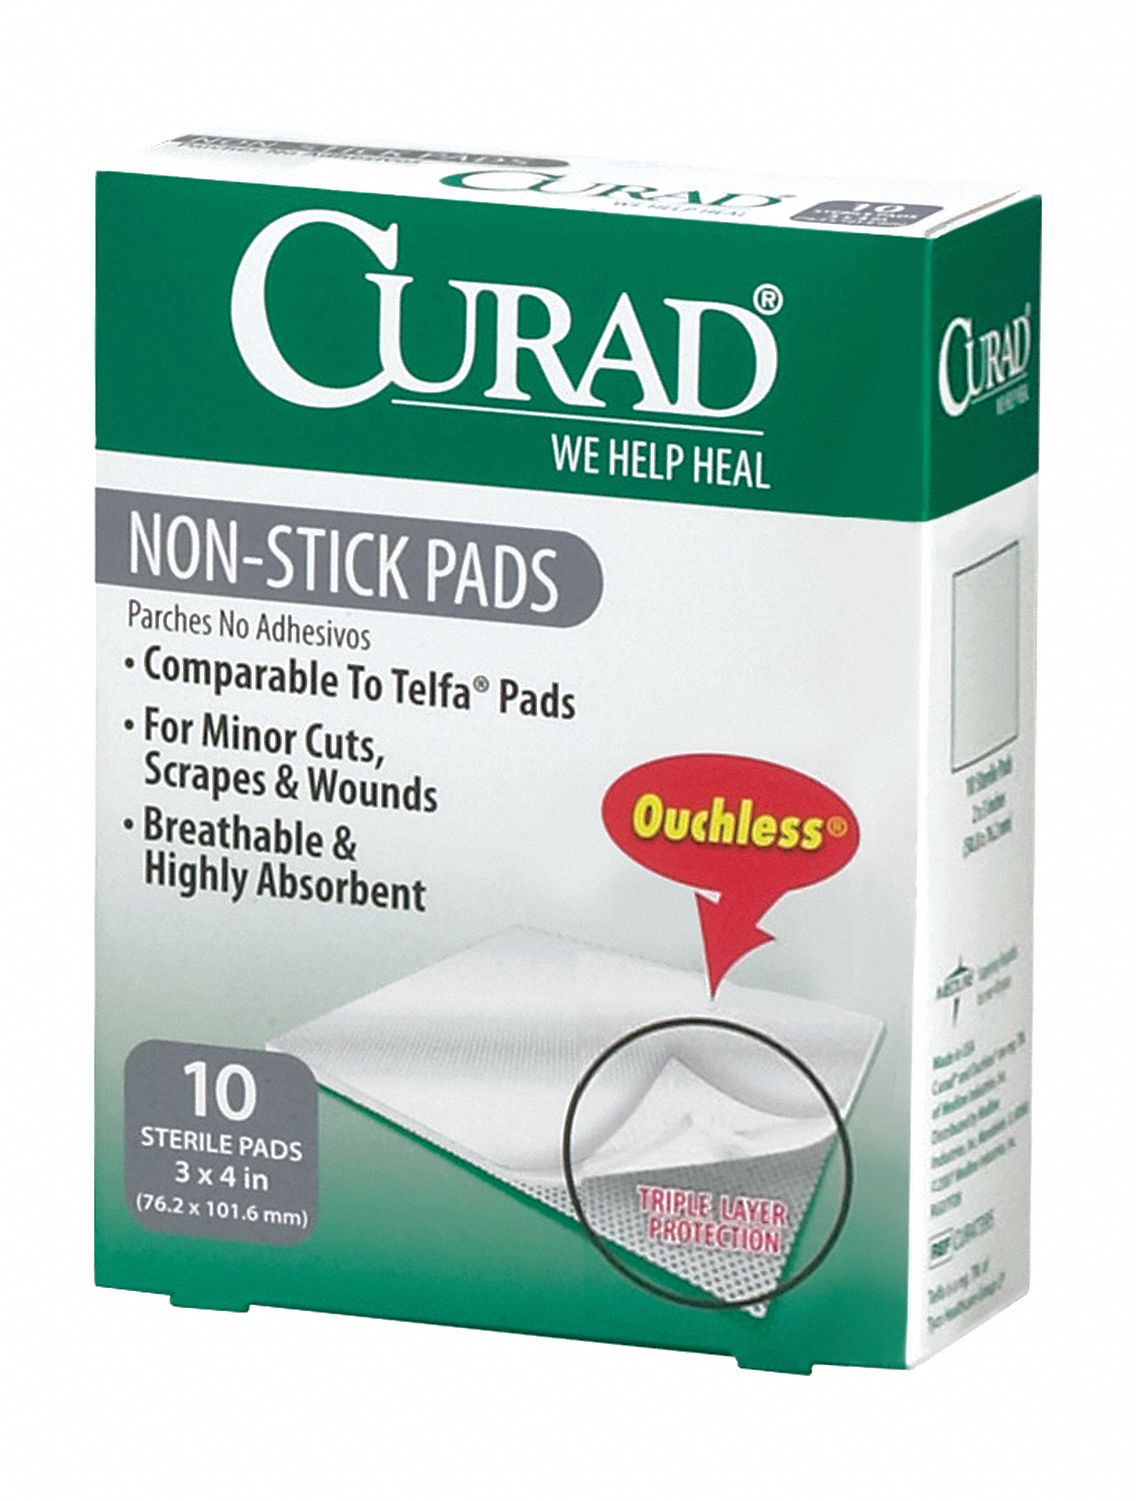 Nonstick Pad: Sterile, White, Perforated Mylar Film Bonded to a Cotton/Polyester Pad, 10 PK